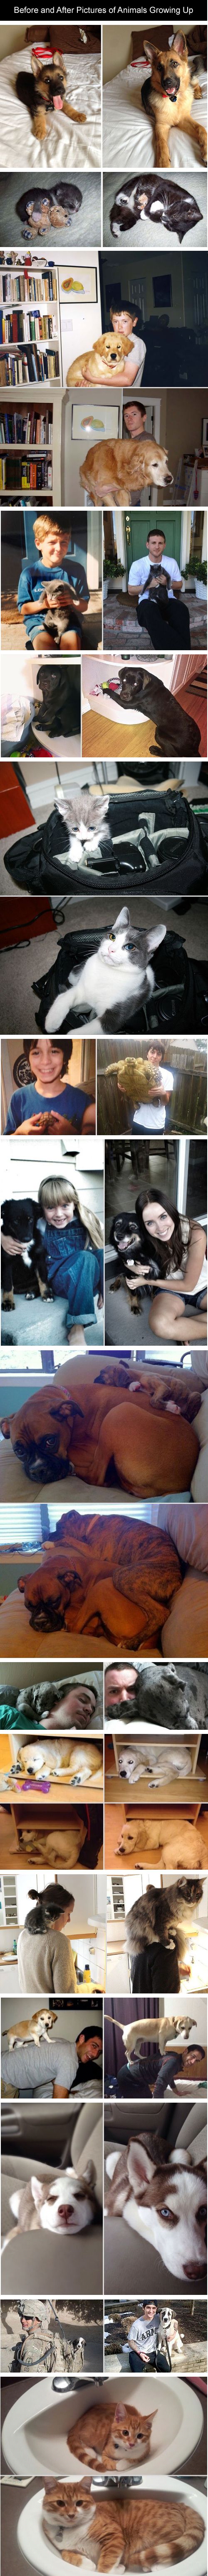 Before and after photos with animals growing up